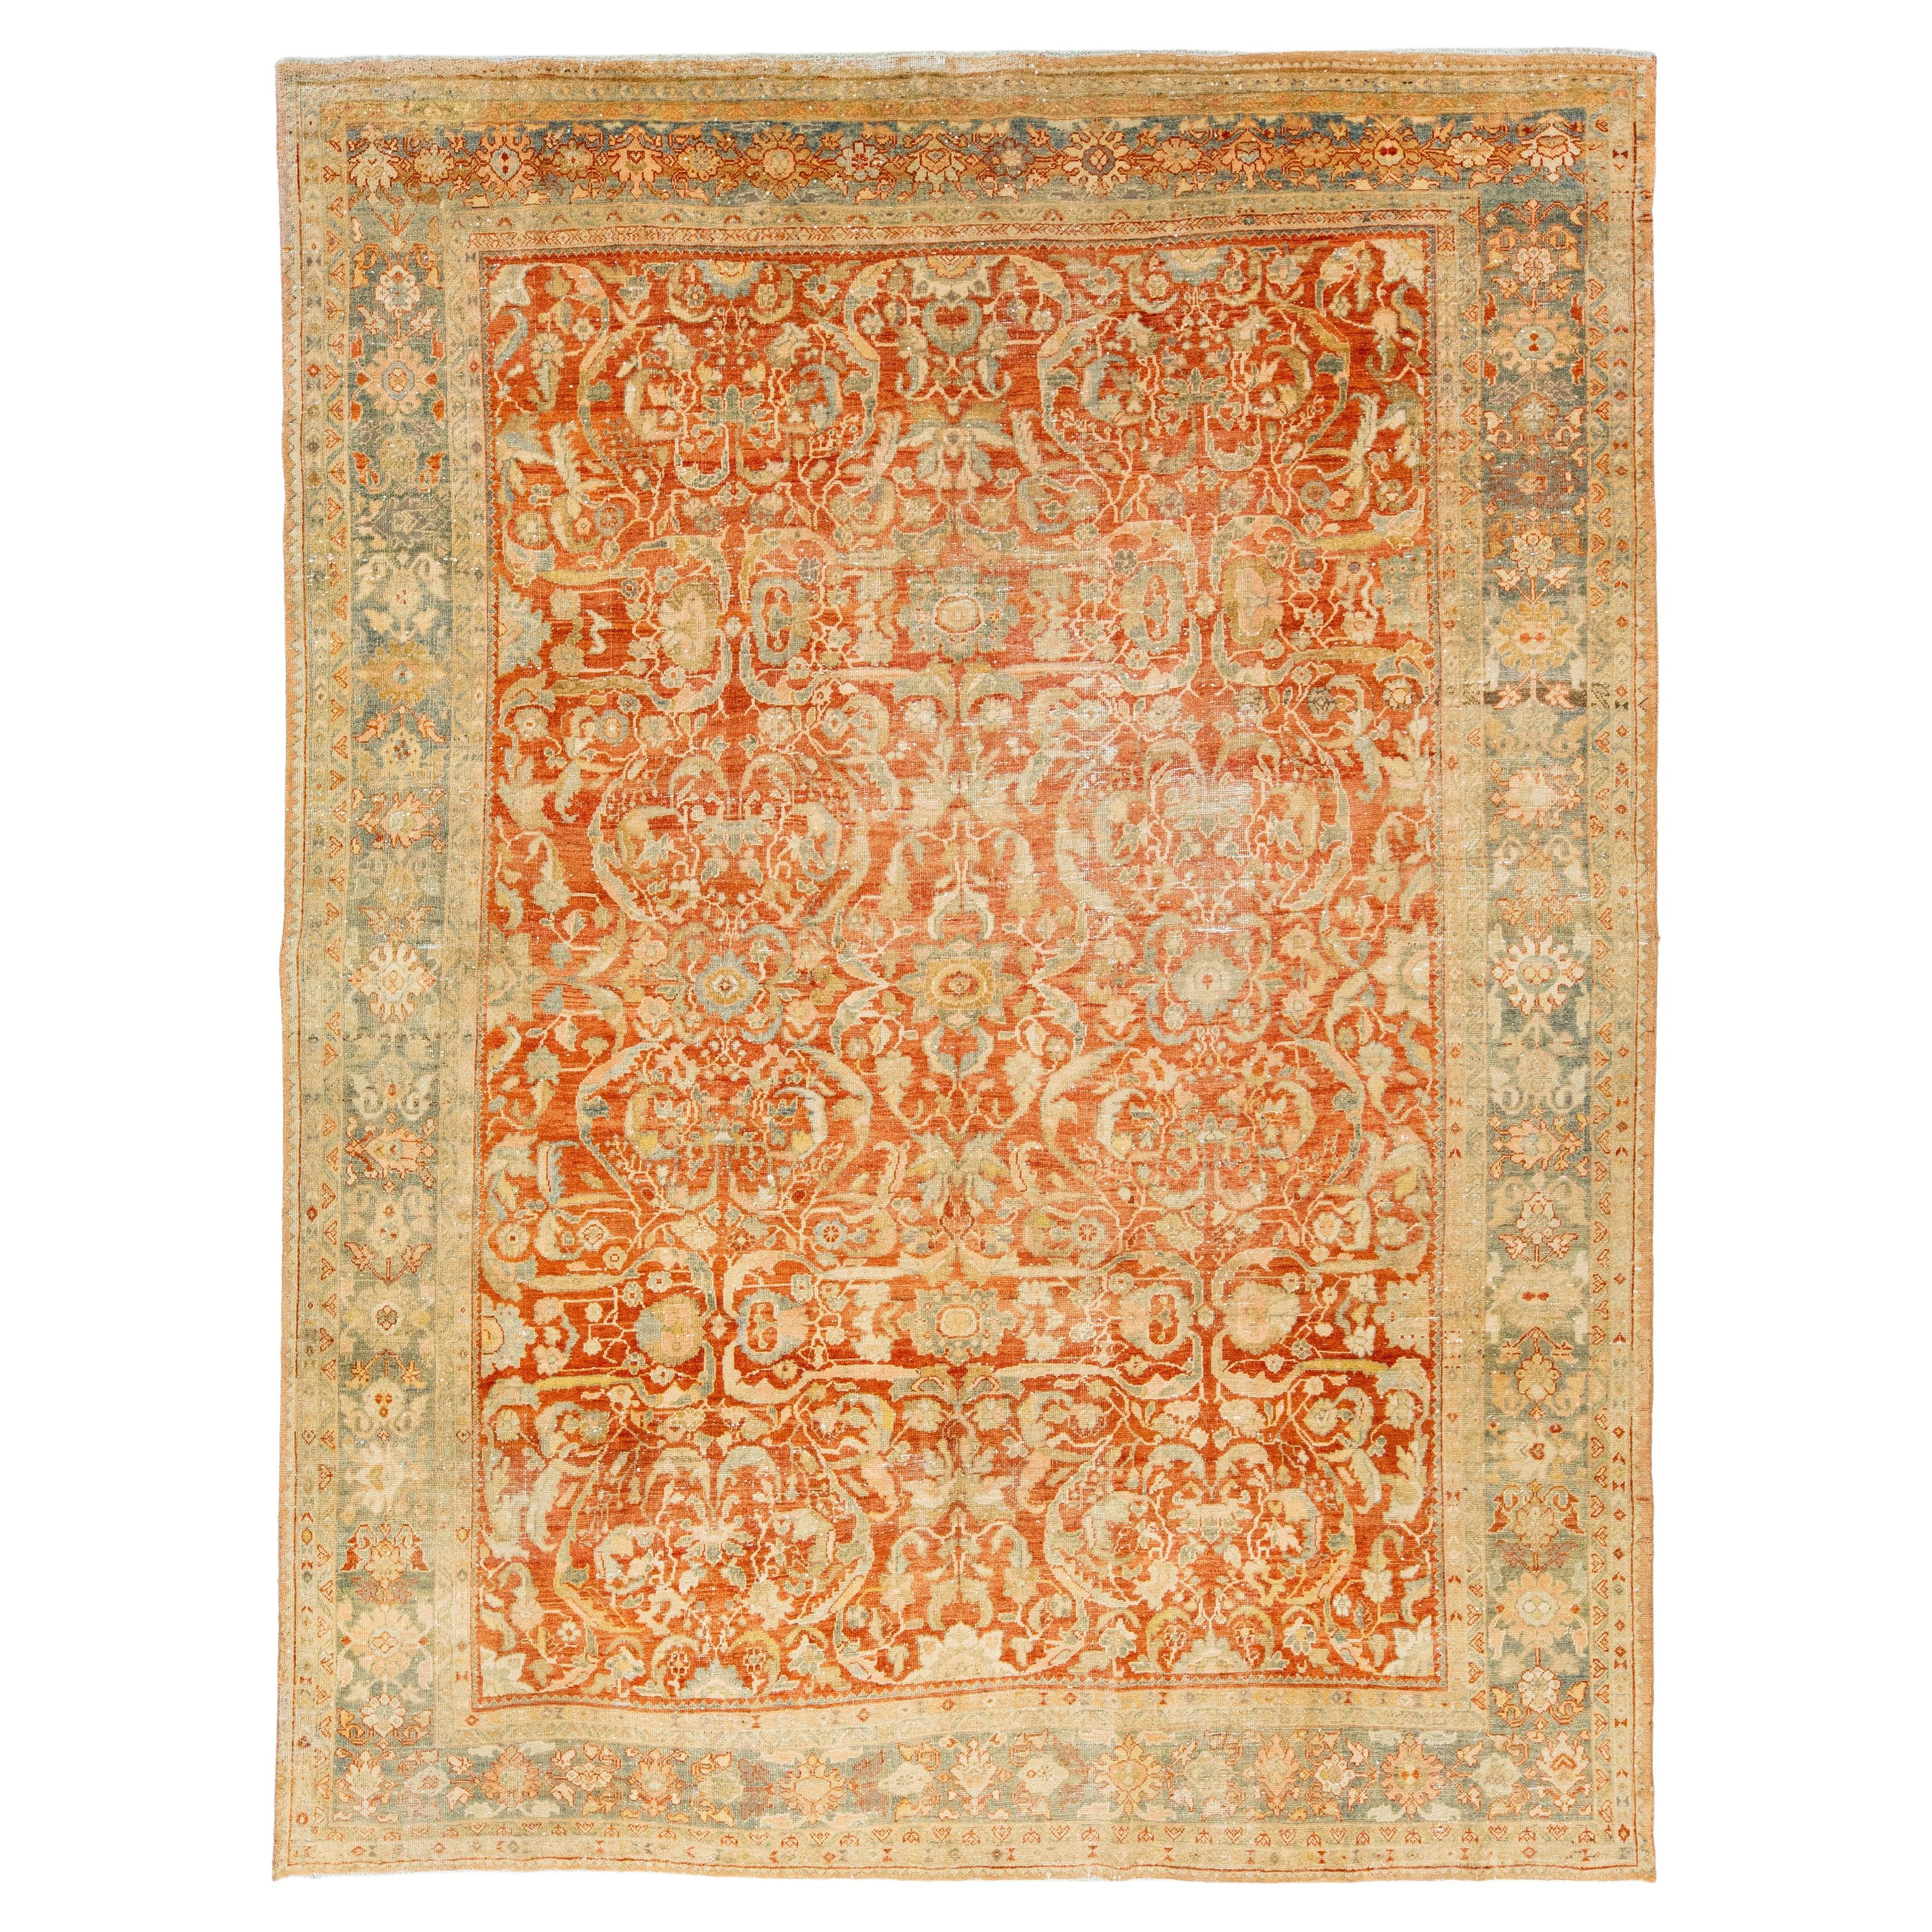 1920s Antique Persian Heriz Wool Rug In Rust With Allover Floral Design  For Sale